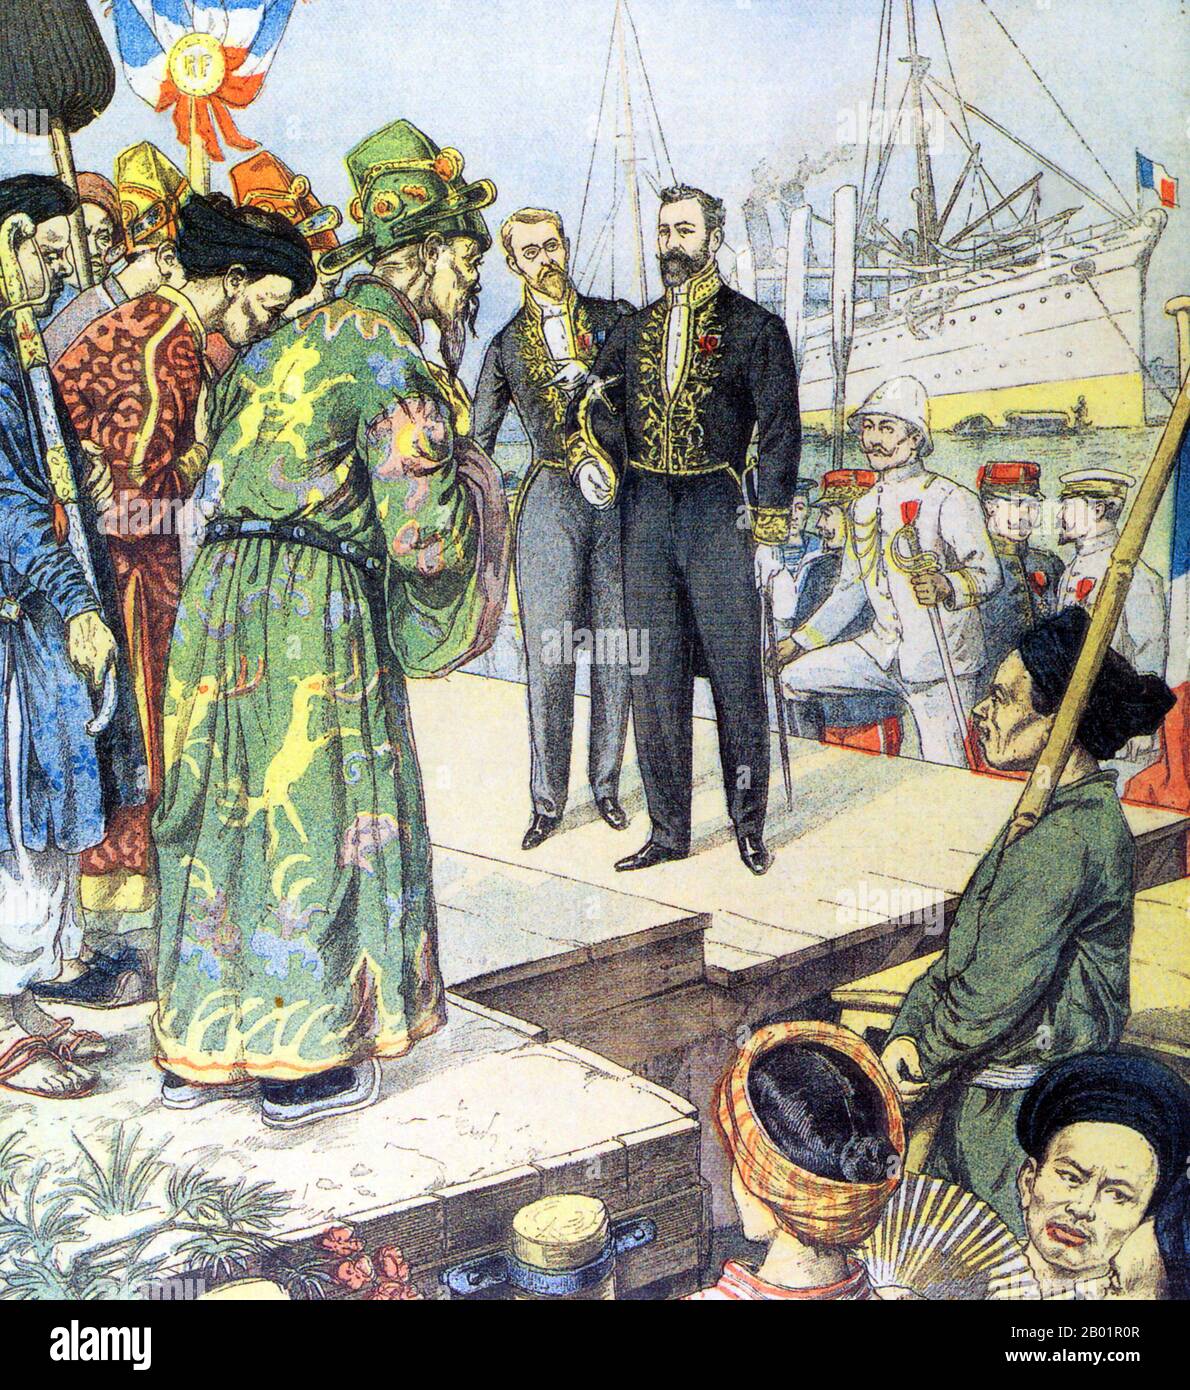 France/Vietnam: The arrival in Saigon of French Governor-General Paul Beau (1857-1927). Engraving by Charles Georges Dufresne (1876-1938) from Le Petit Journal, November 1902.  Jean Baptiste Paul Beau was Governor-General of French Indochina from October 1902 to February 1908.  Conquered by France in 1859, Saigon was influenced by the French during their colonial occupation of Vietnam, and a number of classical Western-style buildings and French villas in the city reflect this. Saigon had, in 1929, a population of 123,890, including 12,100 French. Stock Photo